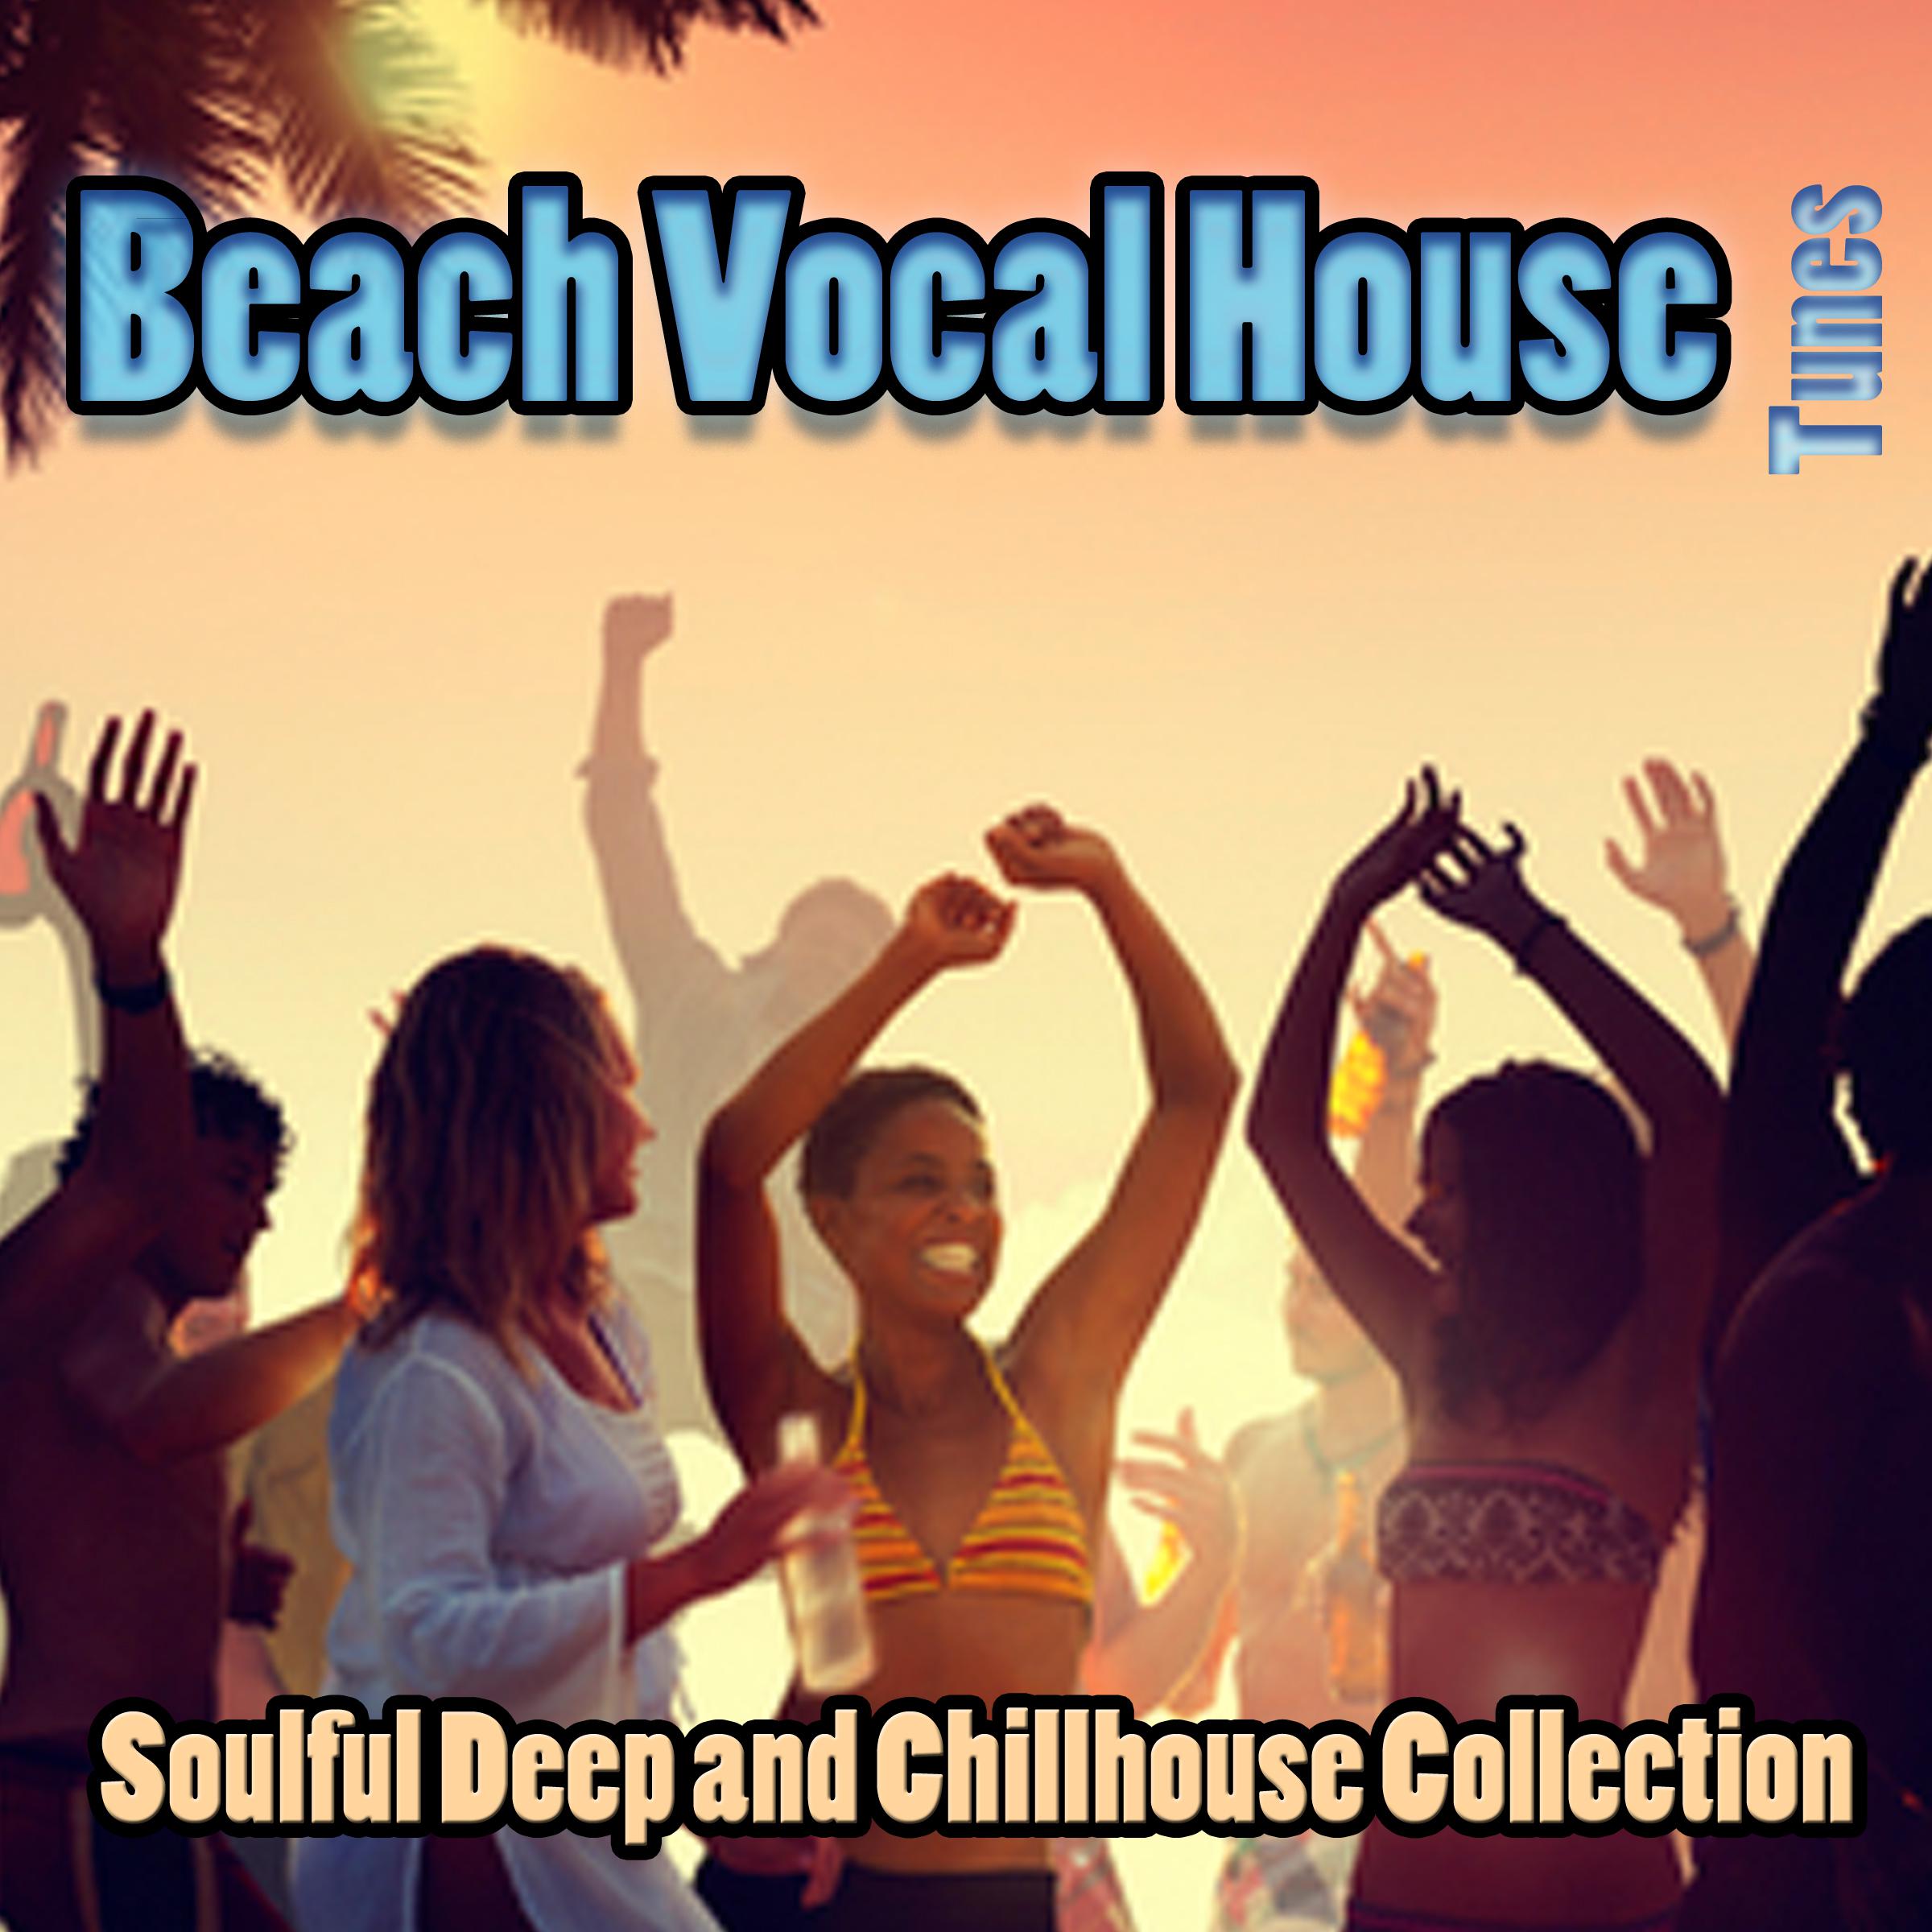 Beach Vocal House Tunes - Soulfoul Deep and Chillhouse Collection